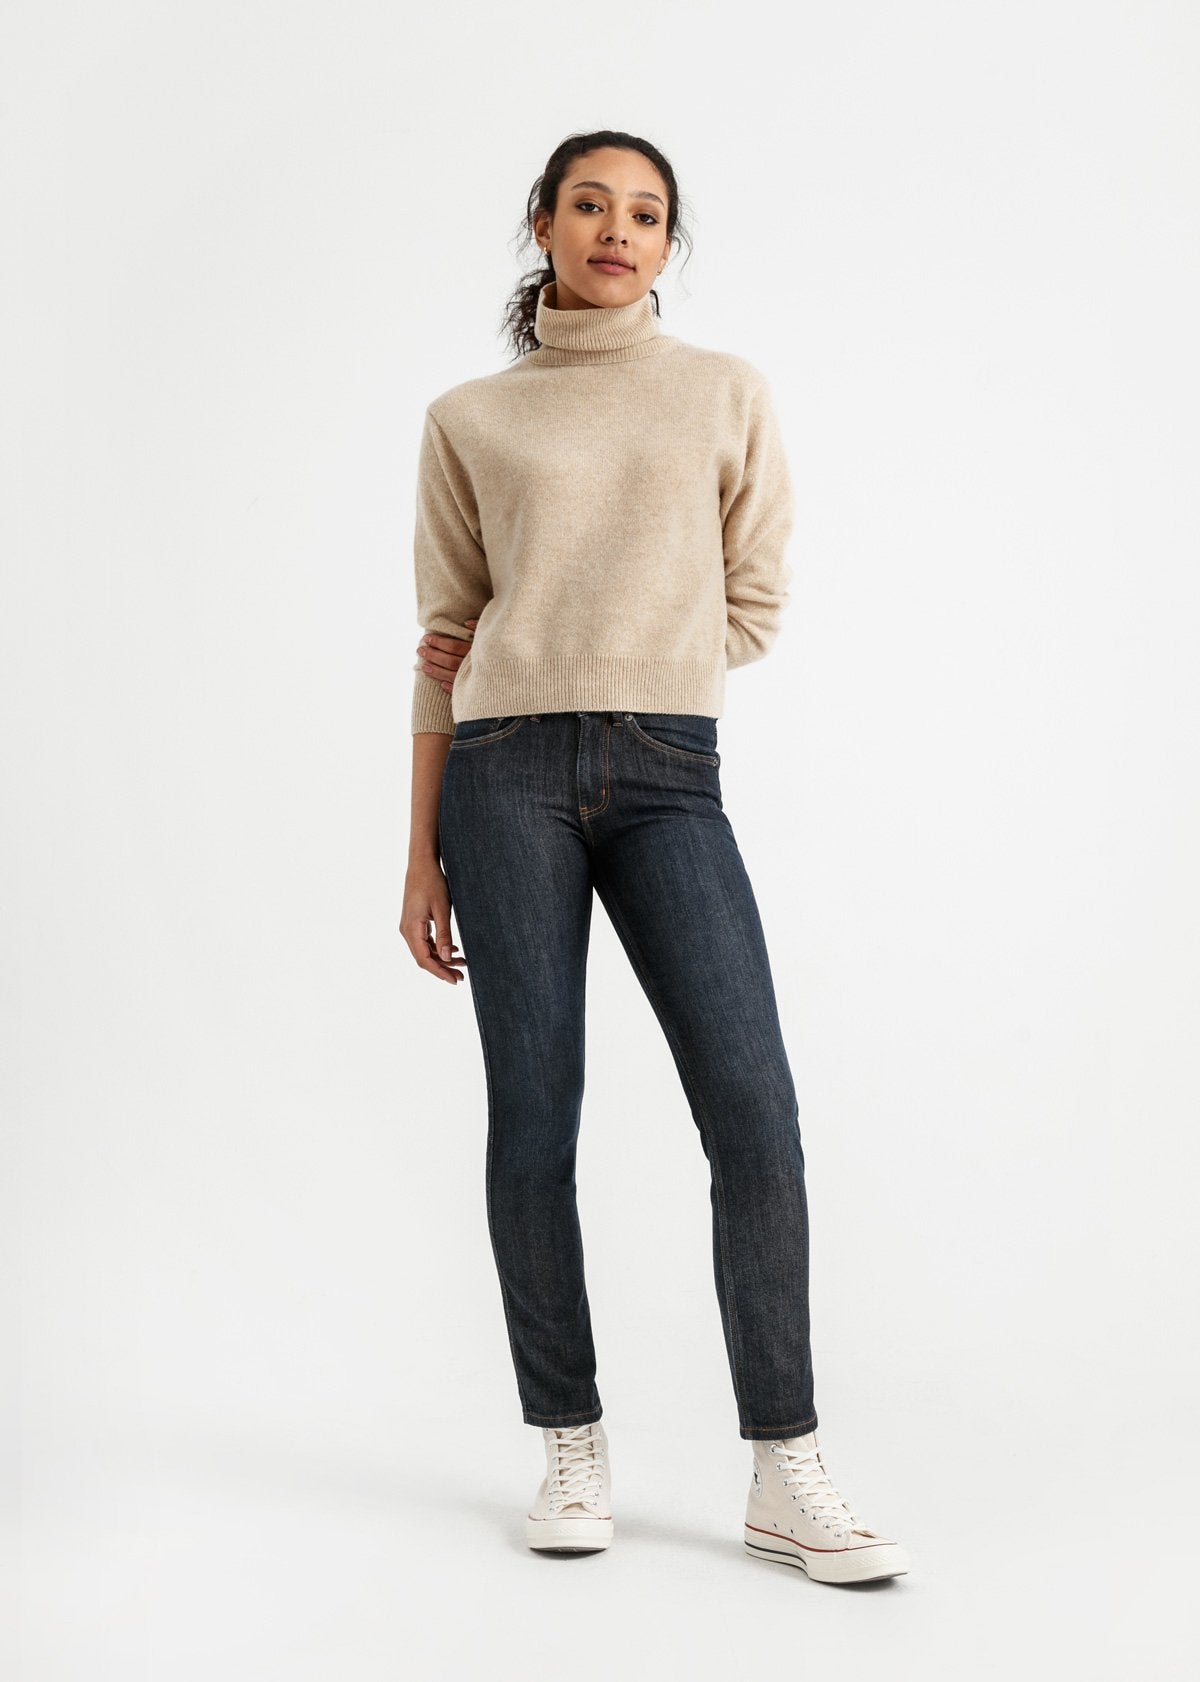 These Fleece-Lined Jeans from Duer Changed My Life